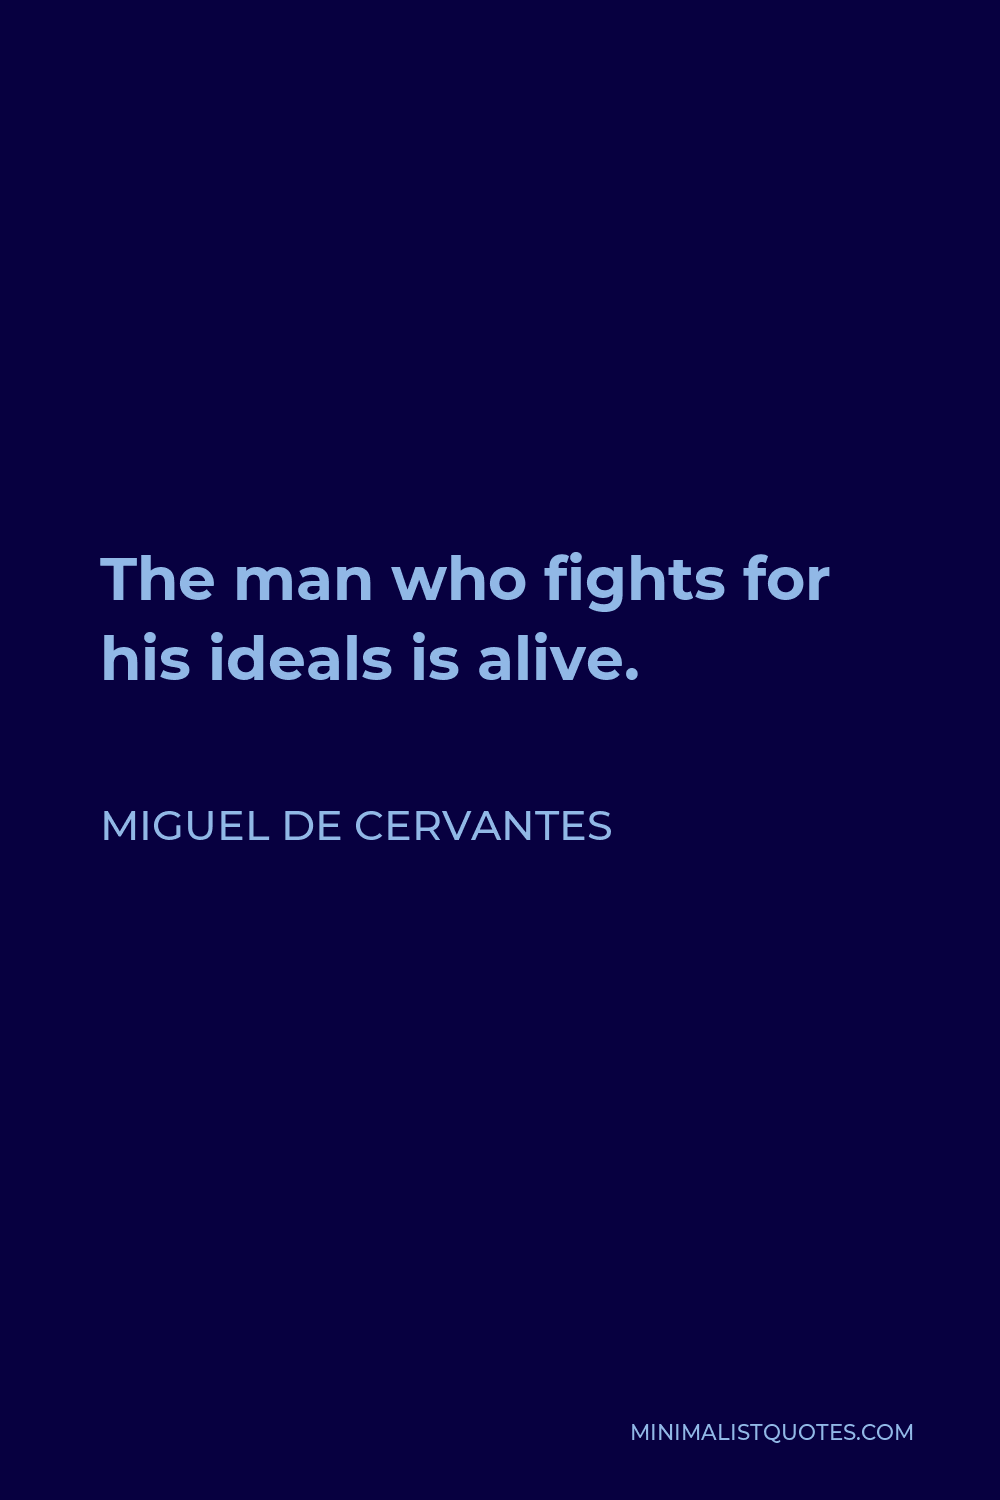 Miguel de Cervantes Quote - The man who fights for his ideals is alive.